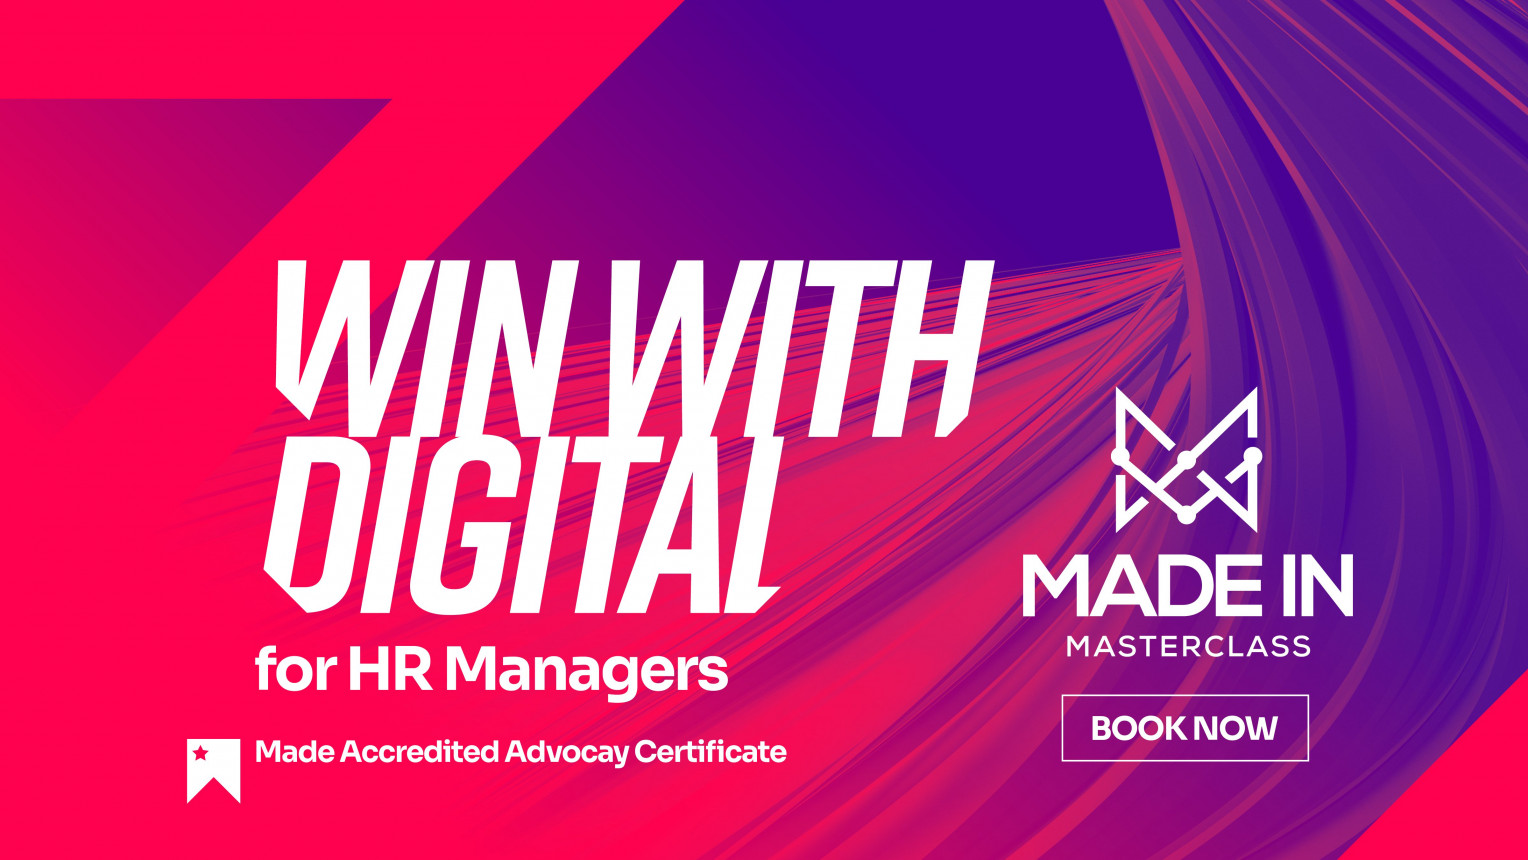 Made Masterclass for HR Managers